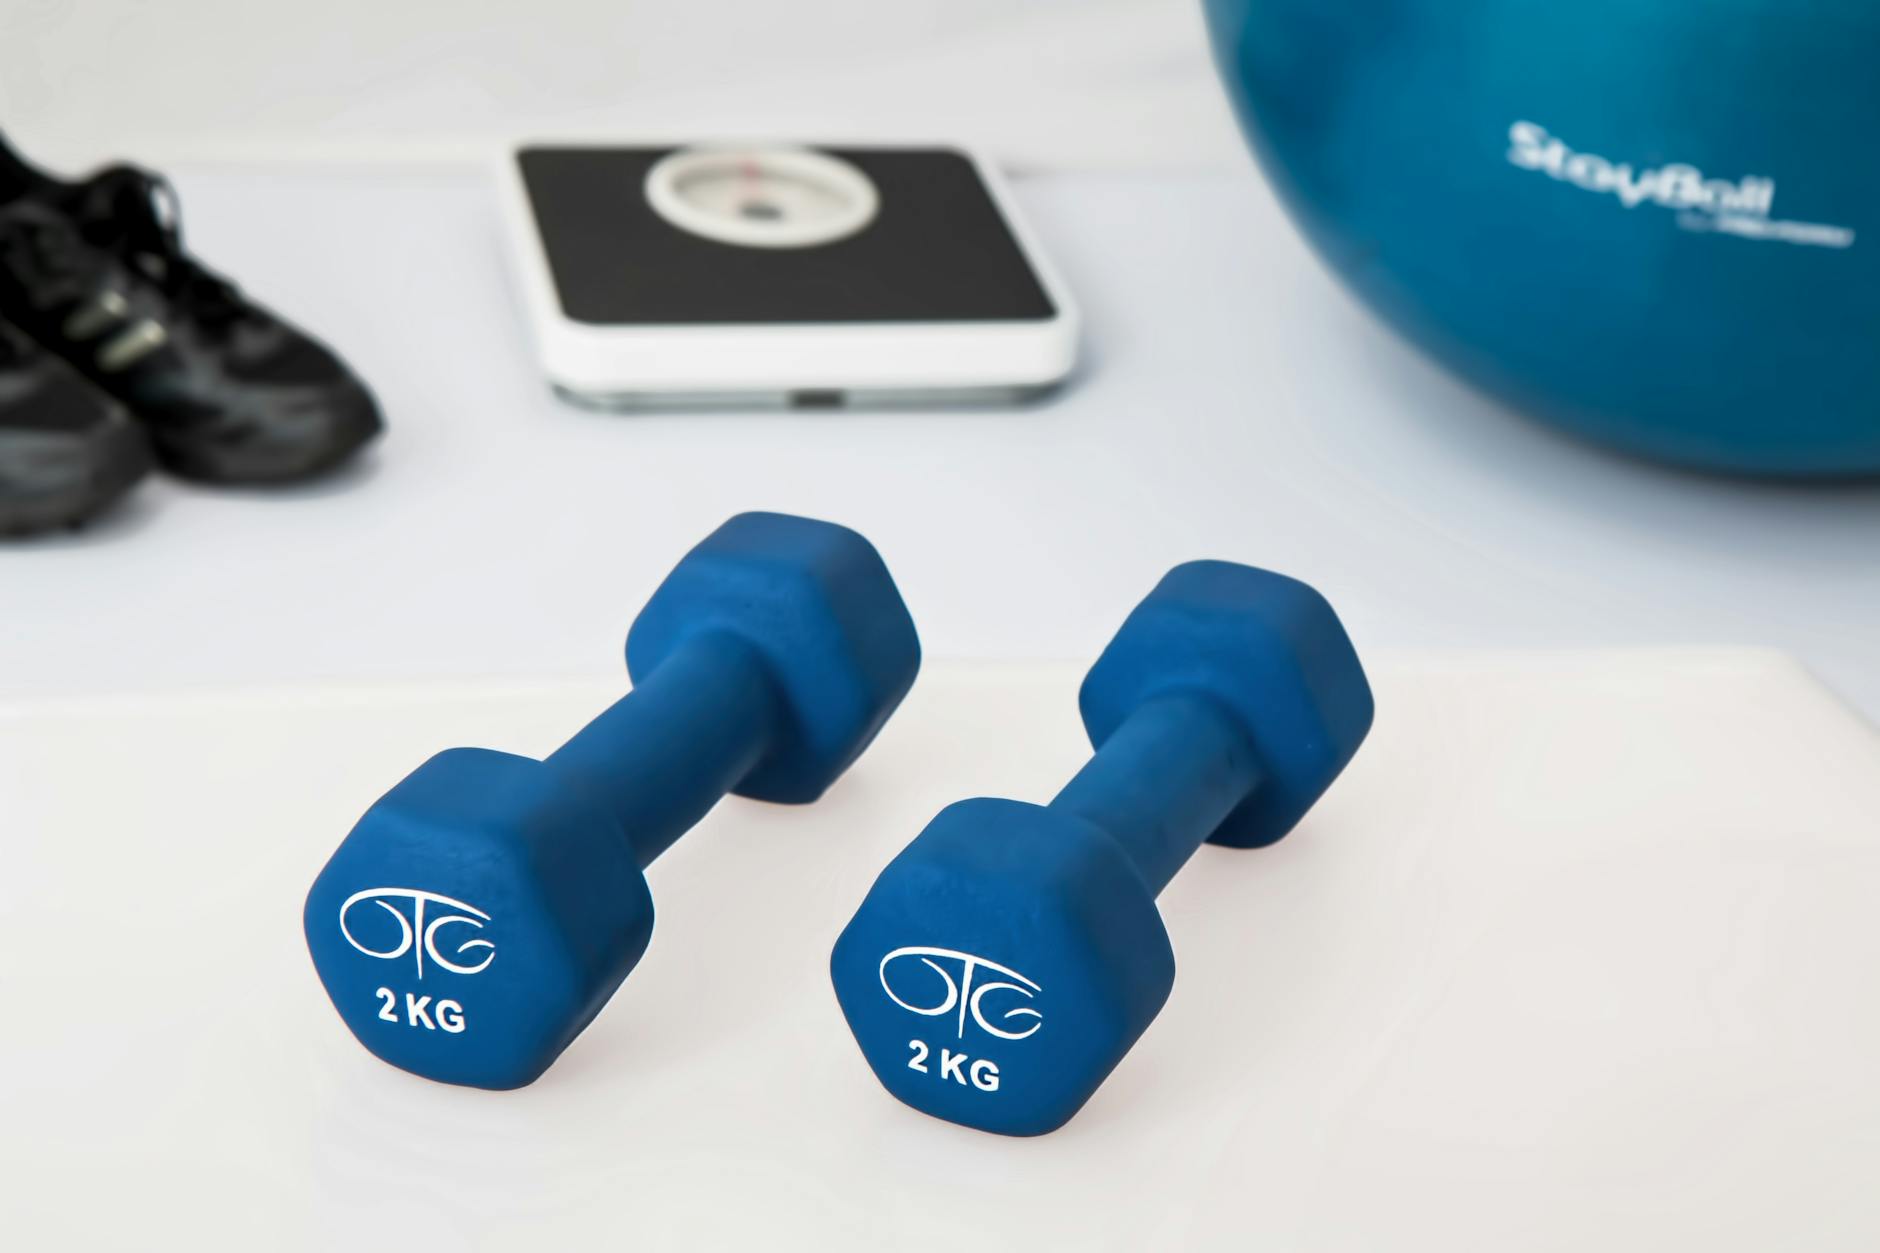 physiotherapy-weight-training-dumbbell-exercise-balls-39671.jpeg
Photo by Pixabay on Pexels.com